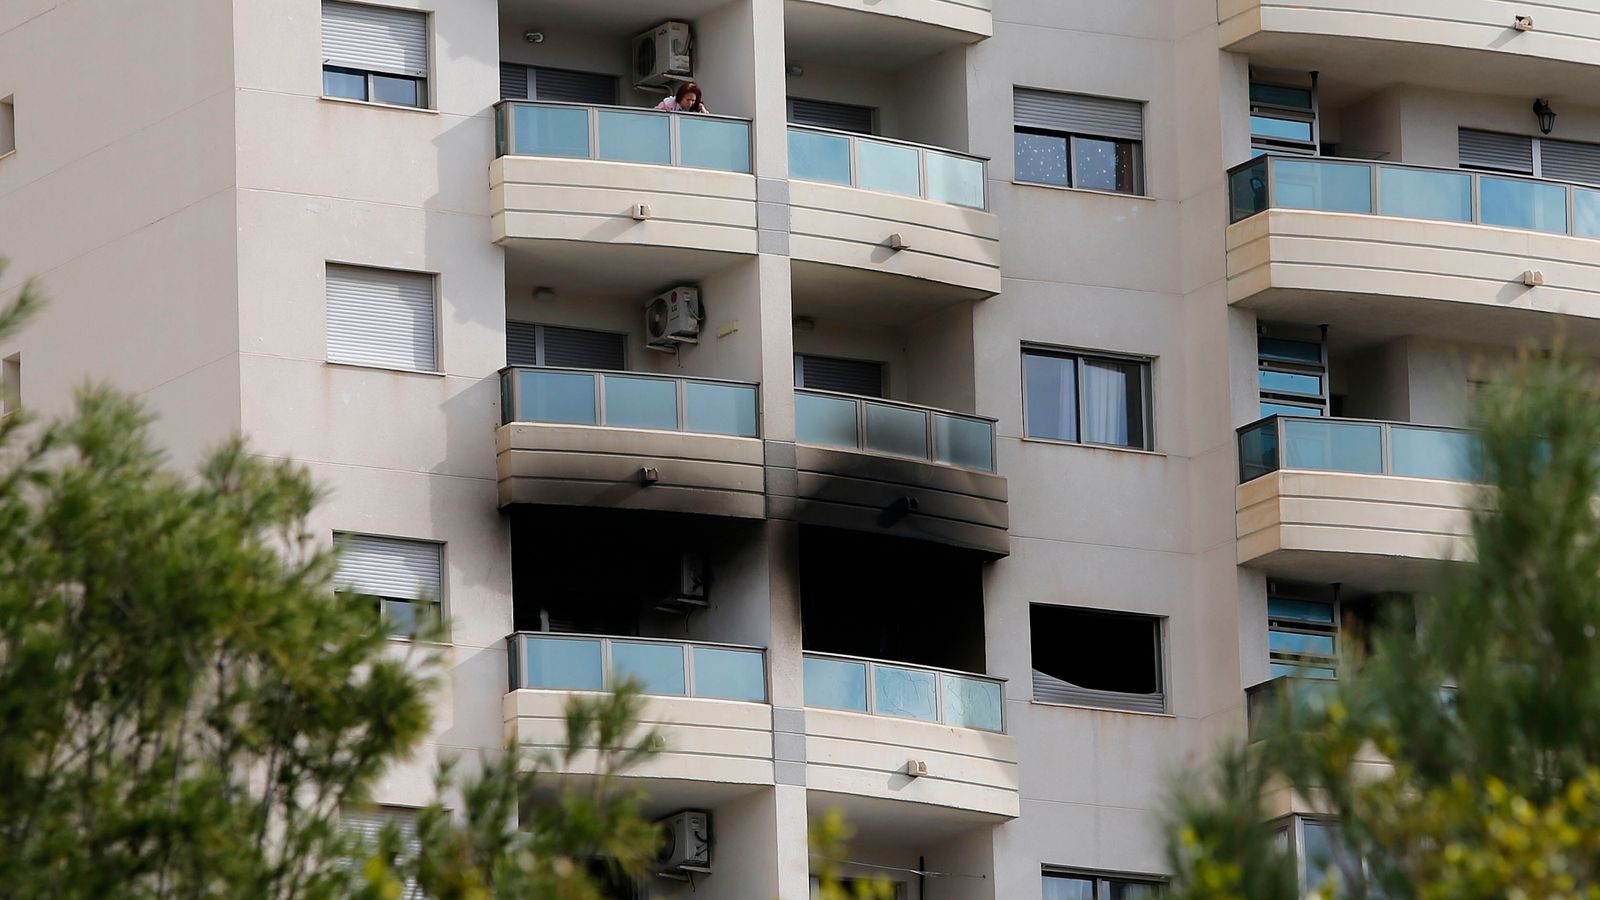 Three members of family die, including boy found hugging pet dog, in Alicante tower block fire